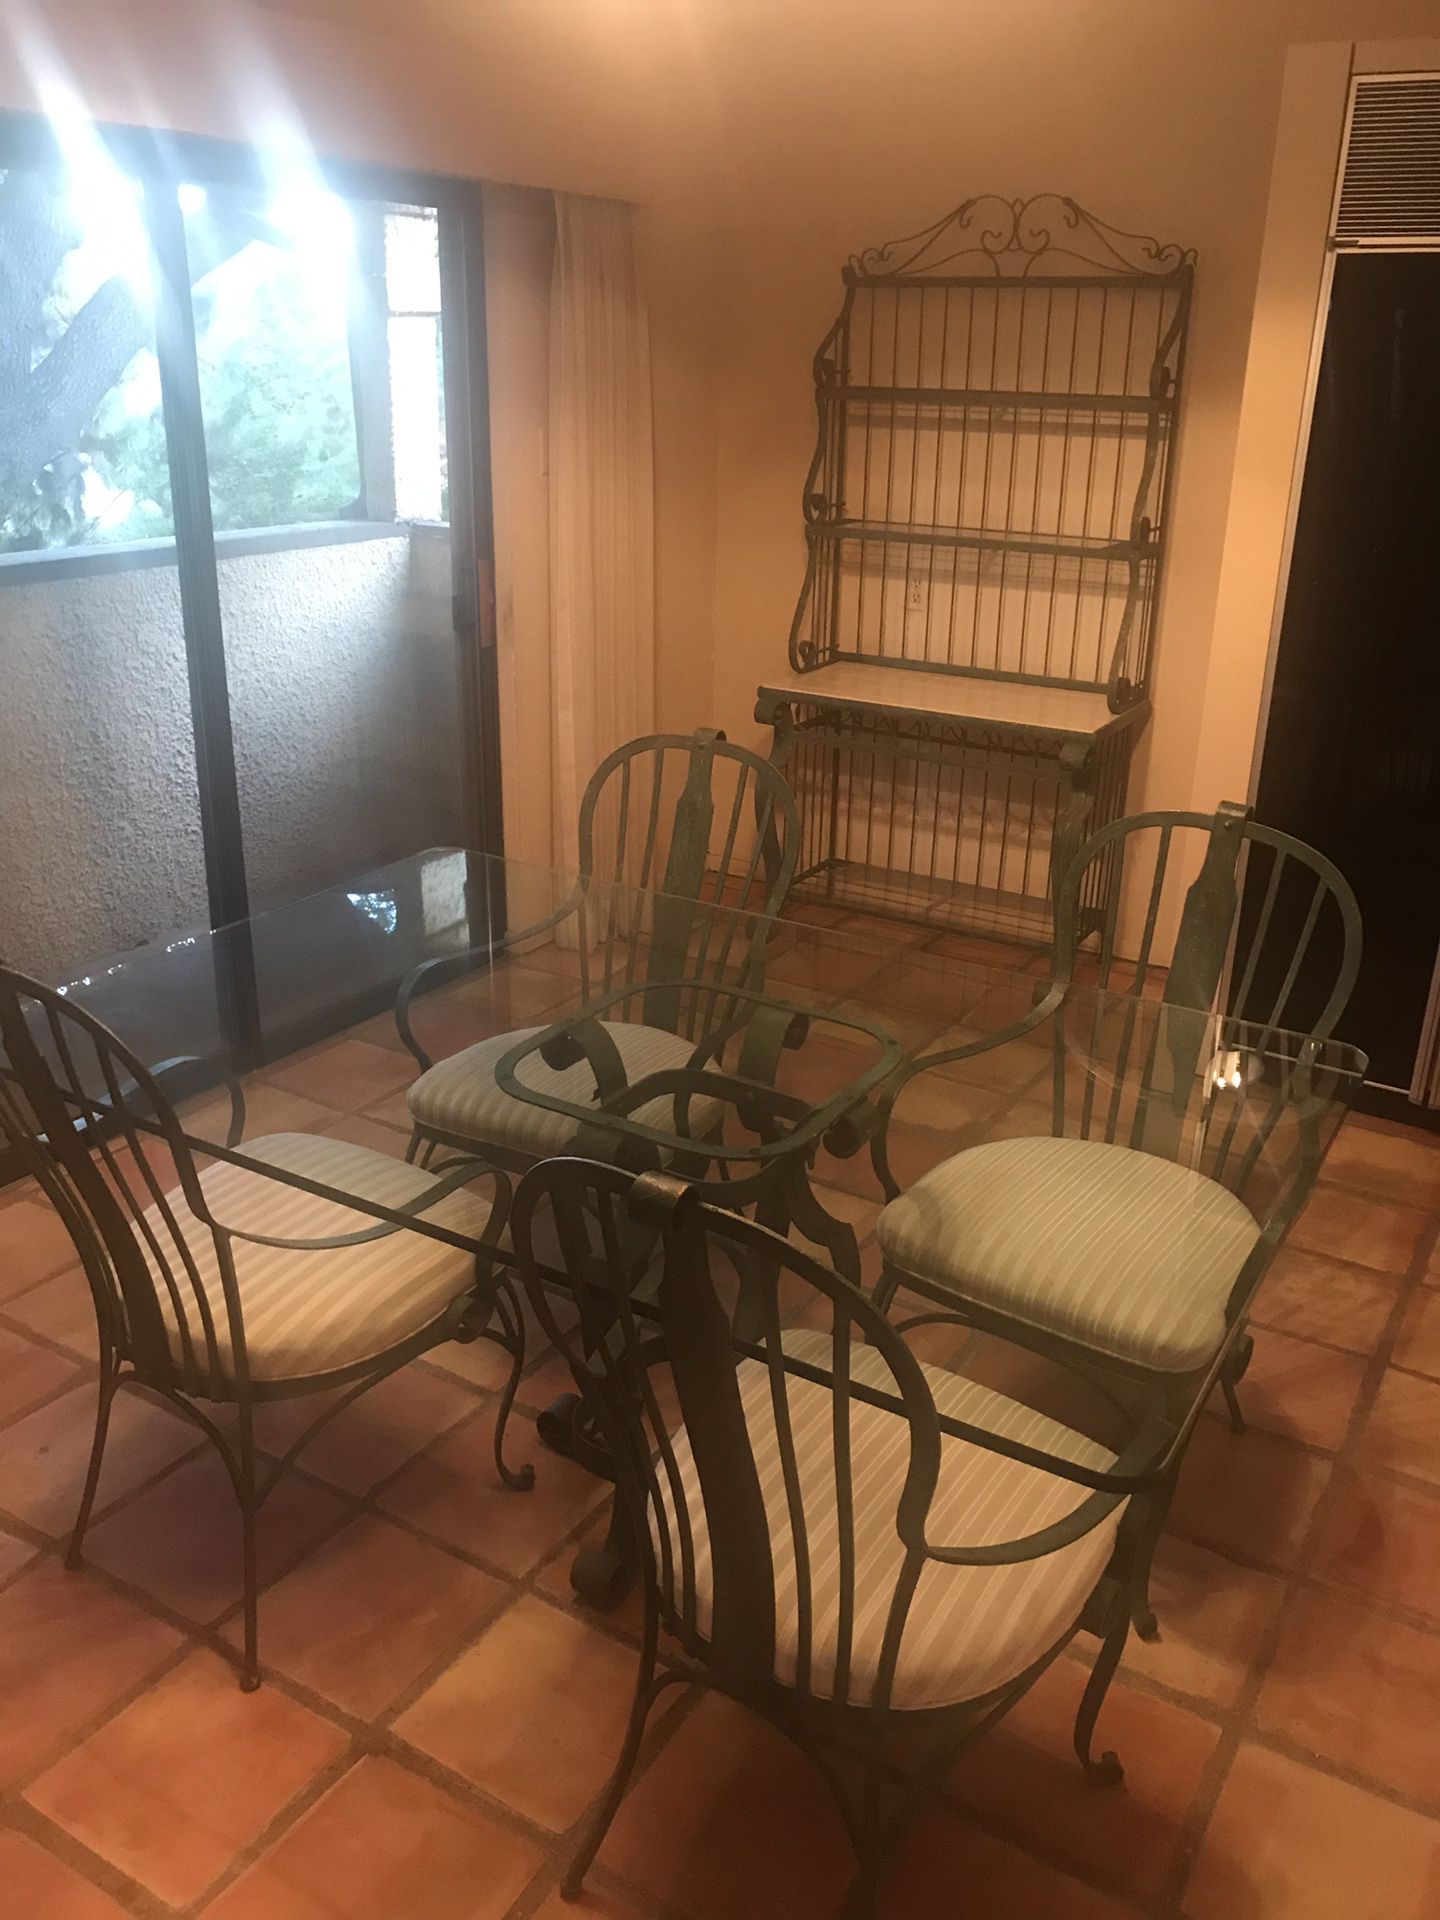 Matching Rod iron and glass kitchen table and bakers rack